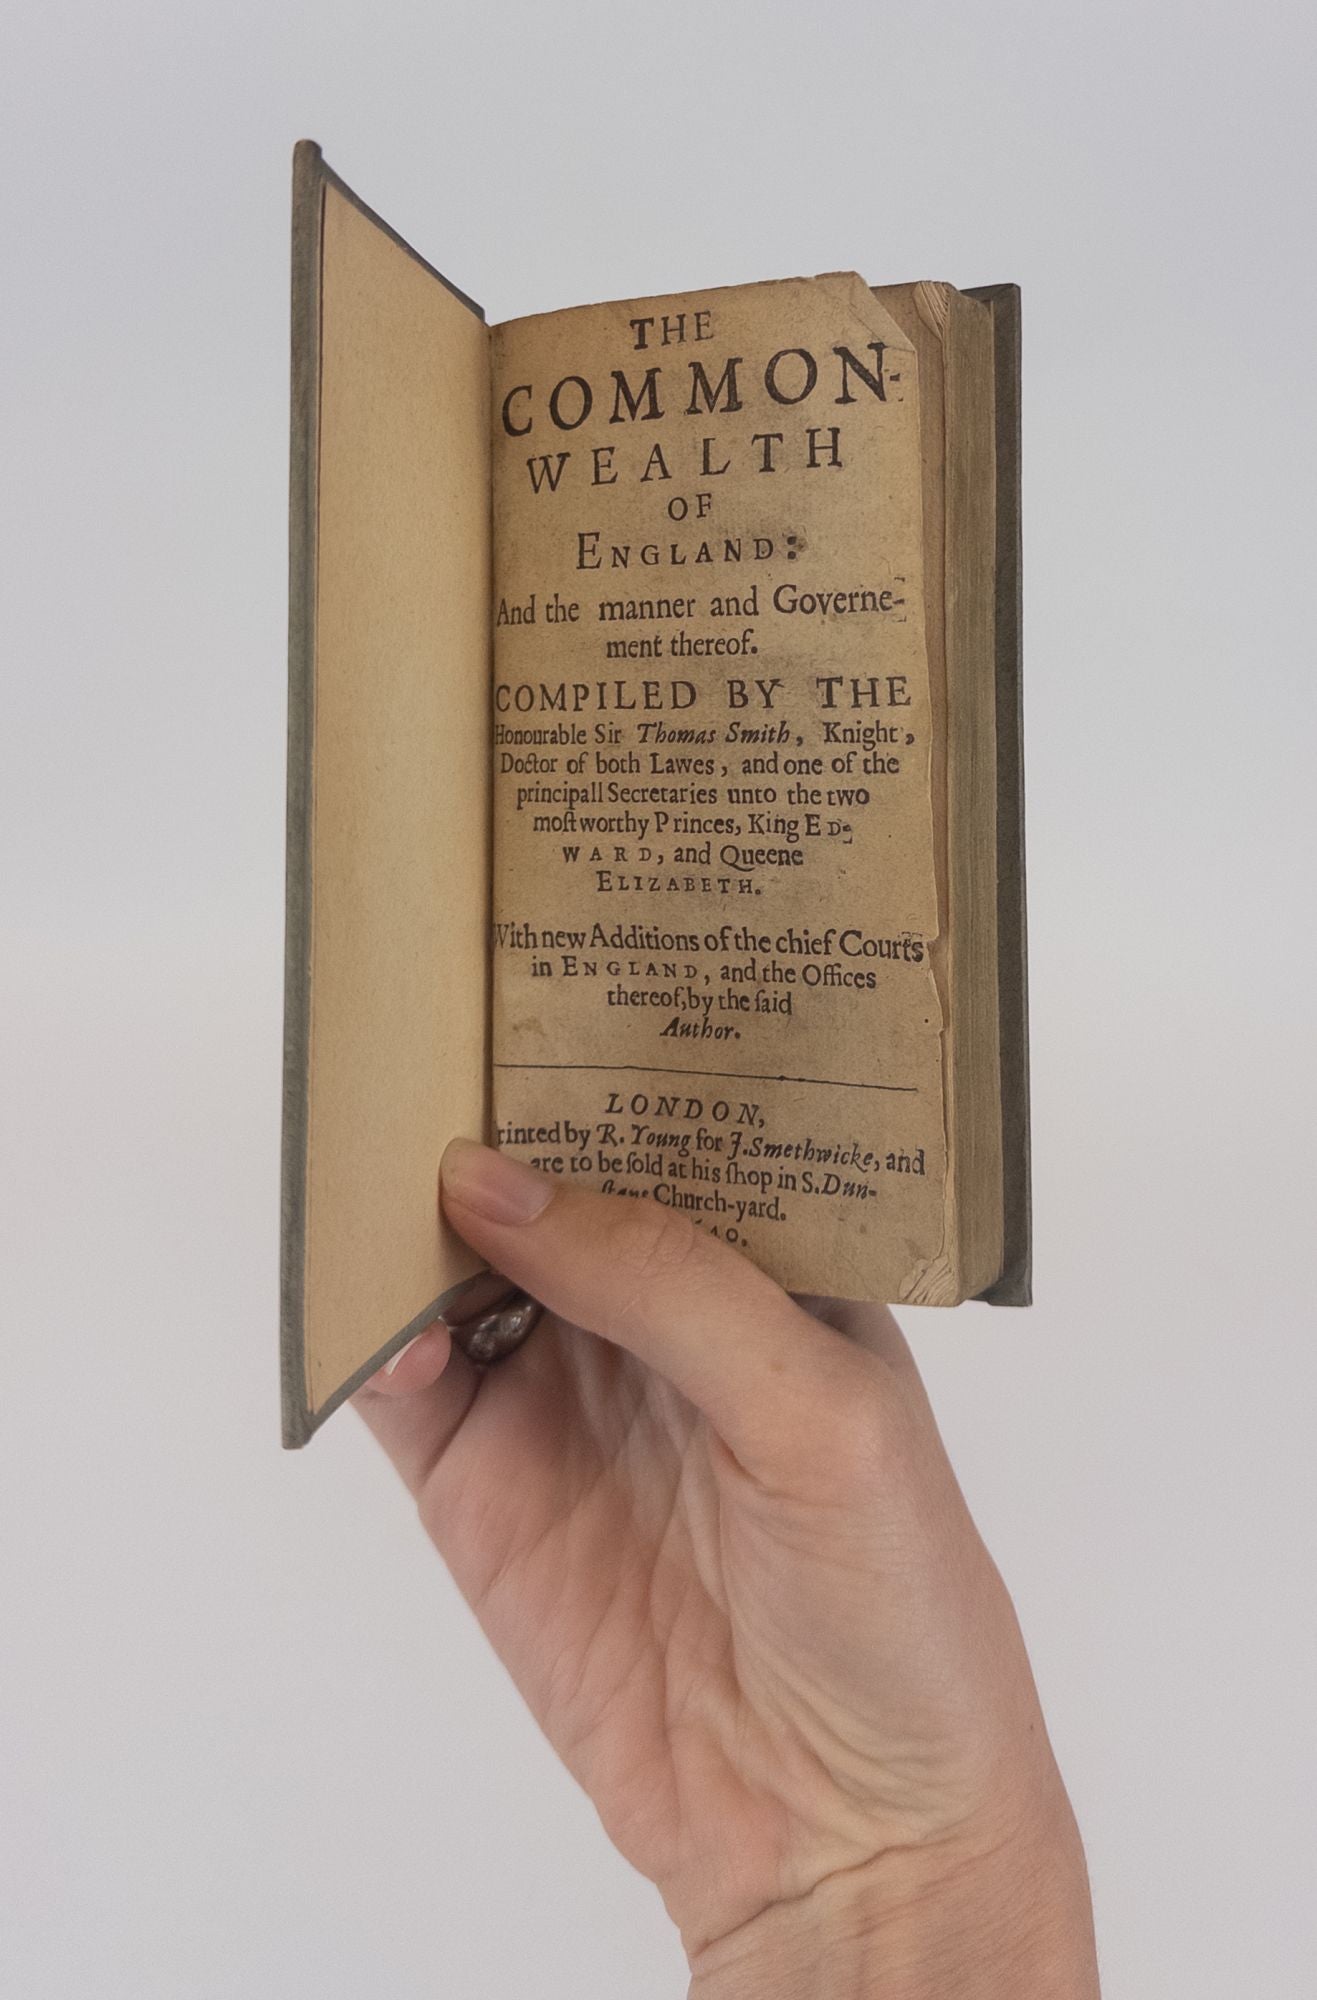 Product Image for THE COMMONWEALTH OF ENGLAND: AND THE MANNER AND GOVERNMENT THEREOF. COMPILED BY THE HONOURABLE SIR THOMAS SMITH, KNIGHT, DOCTOR OF BOTH LAWES, AND ONE OF THE PRINCIPALL SECRETARIES UNTO THE TWO MOSTWORTHY PRINCES, KING EDWARD, AND QUEENE ELIZABETH. WITH N